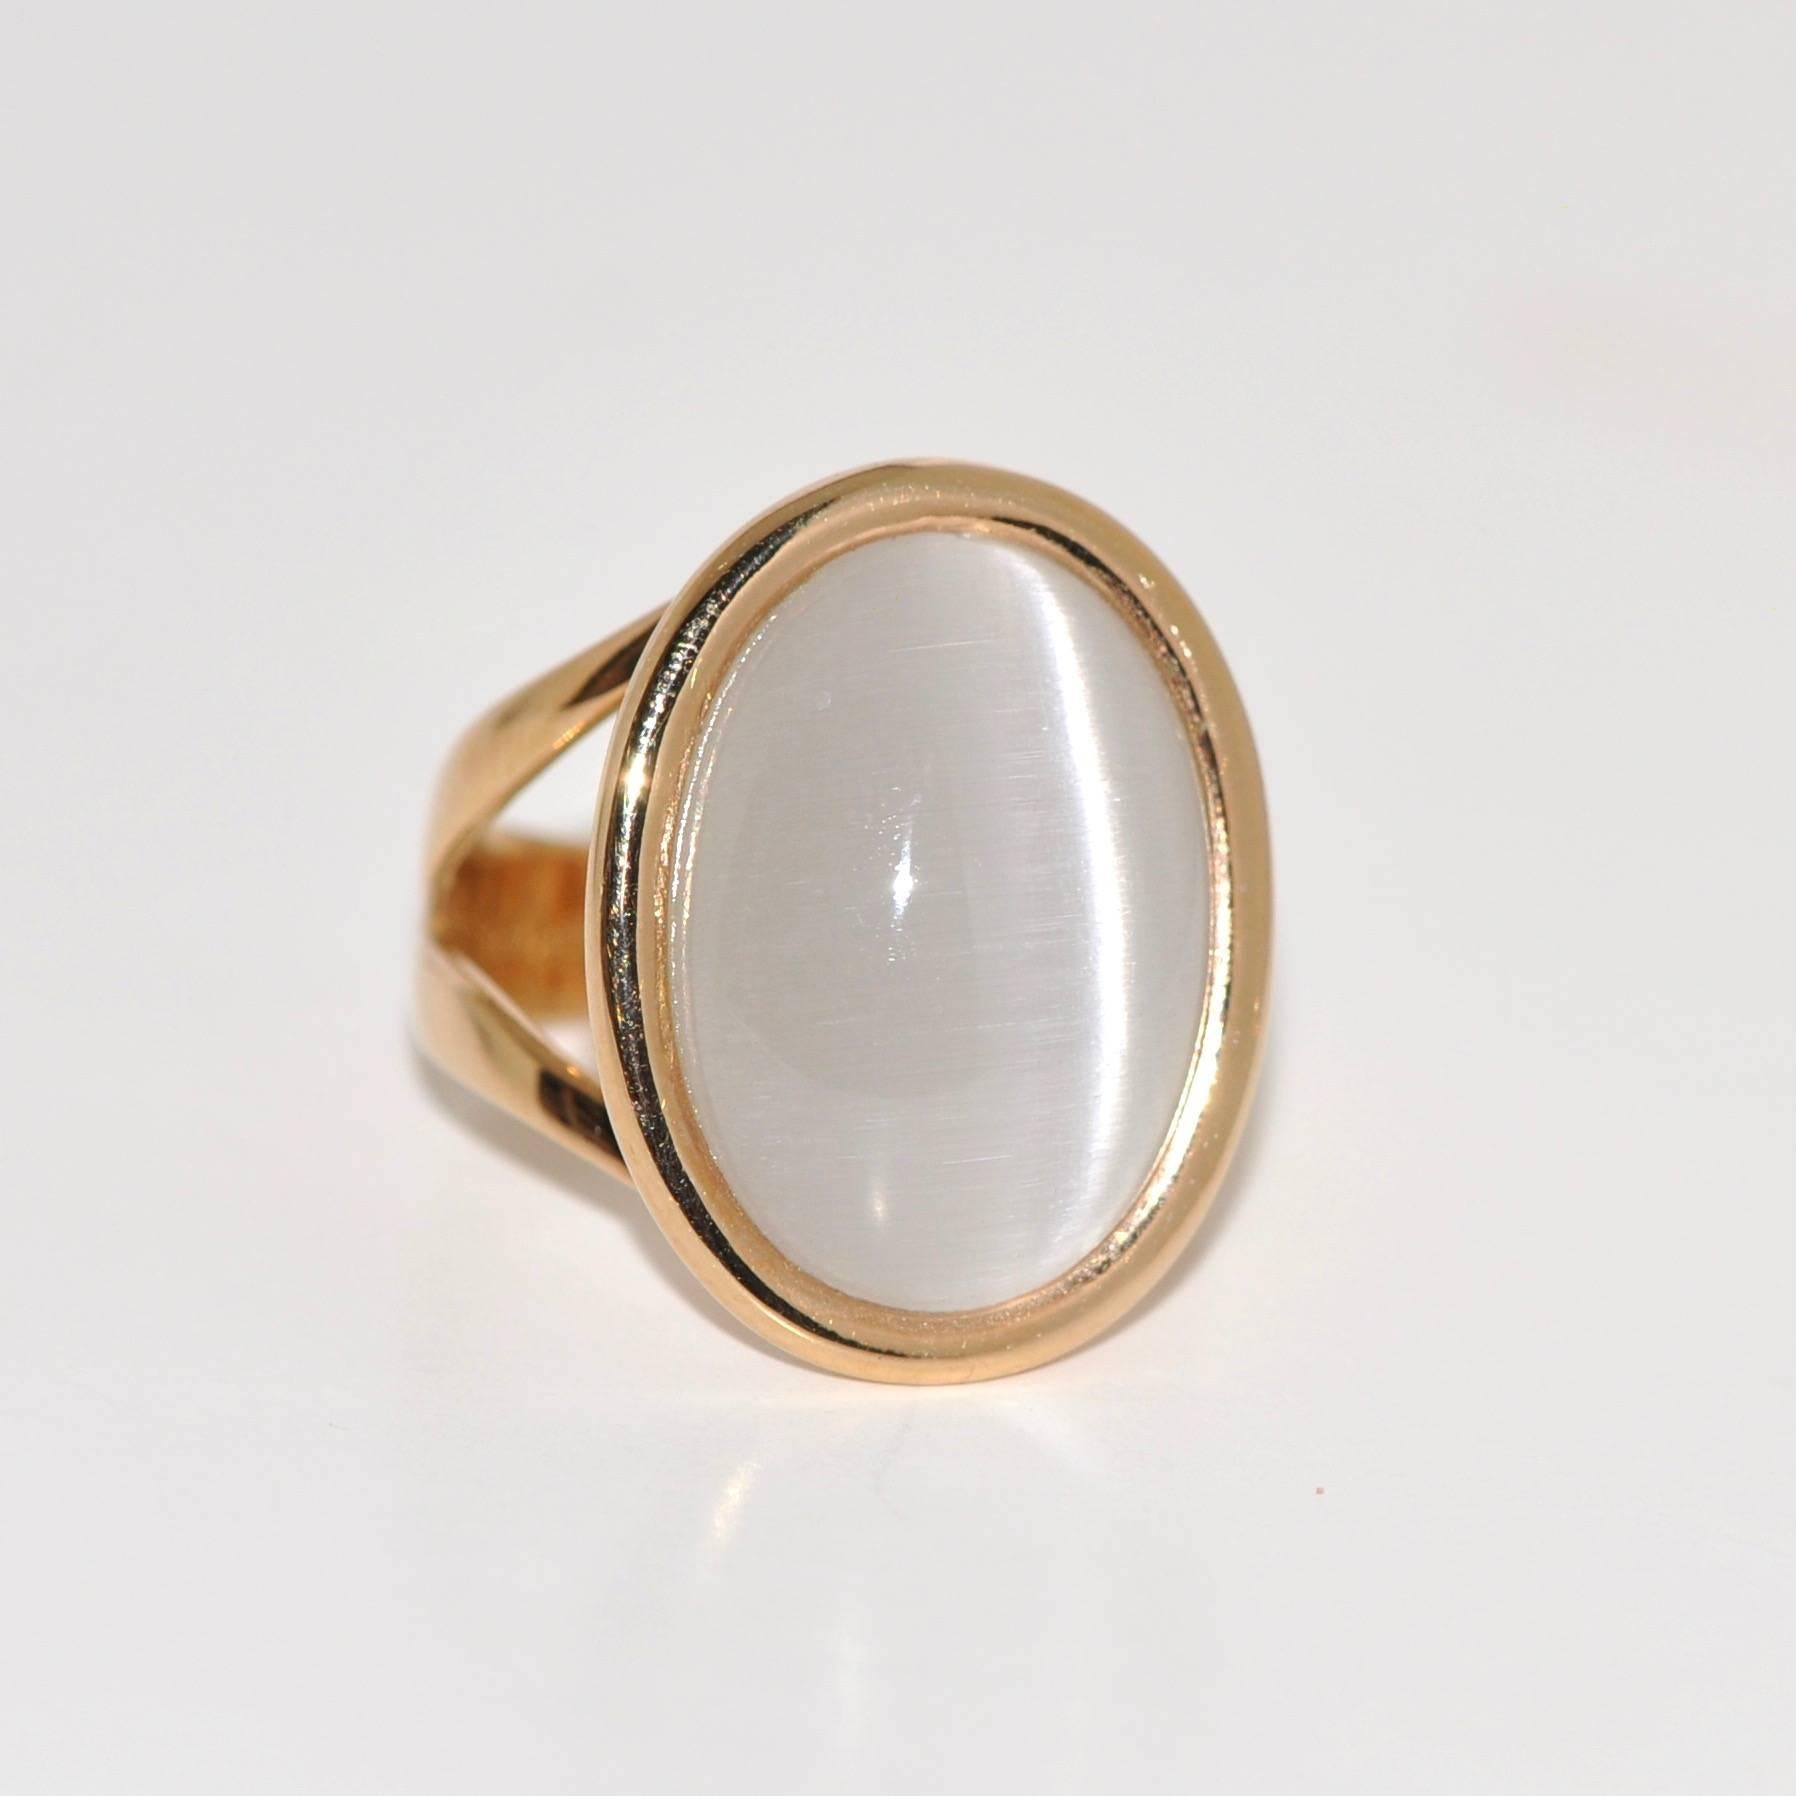 Discover this Grey Quartz and Rose Gold 18 Carat Dome Ring
Grey Quartz
Rose Gold 18 Carat 
French Size 53
US Size 6 1/4
